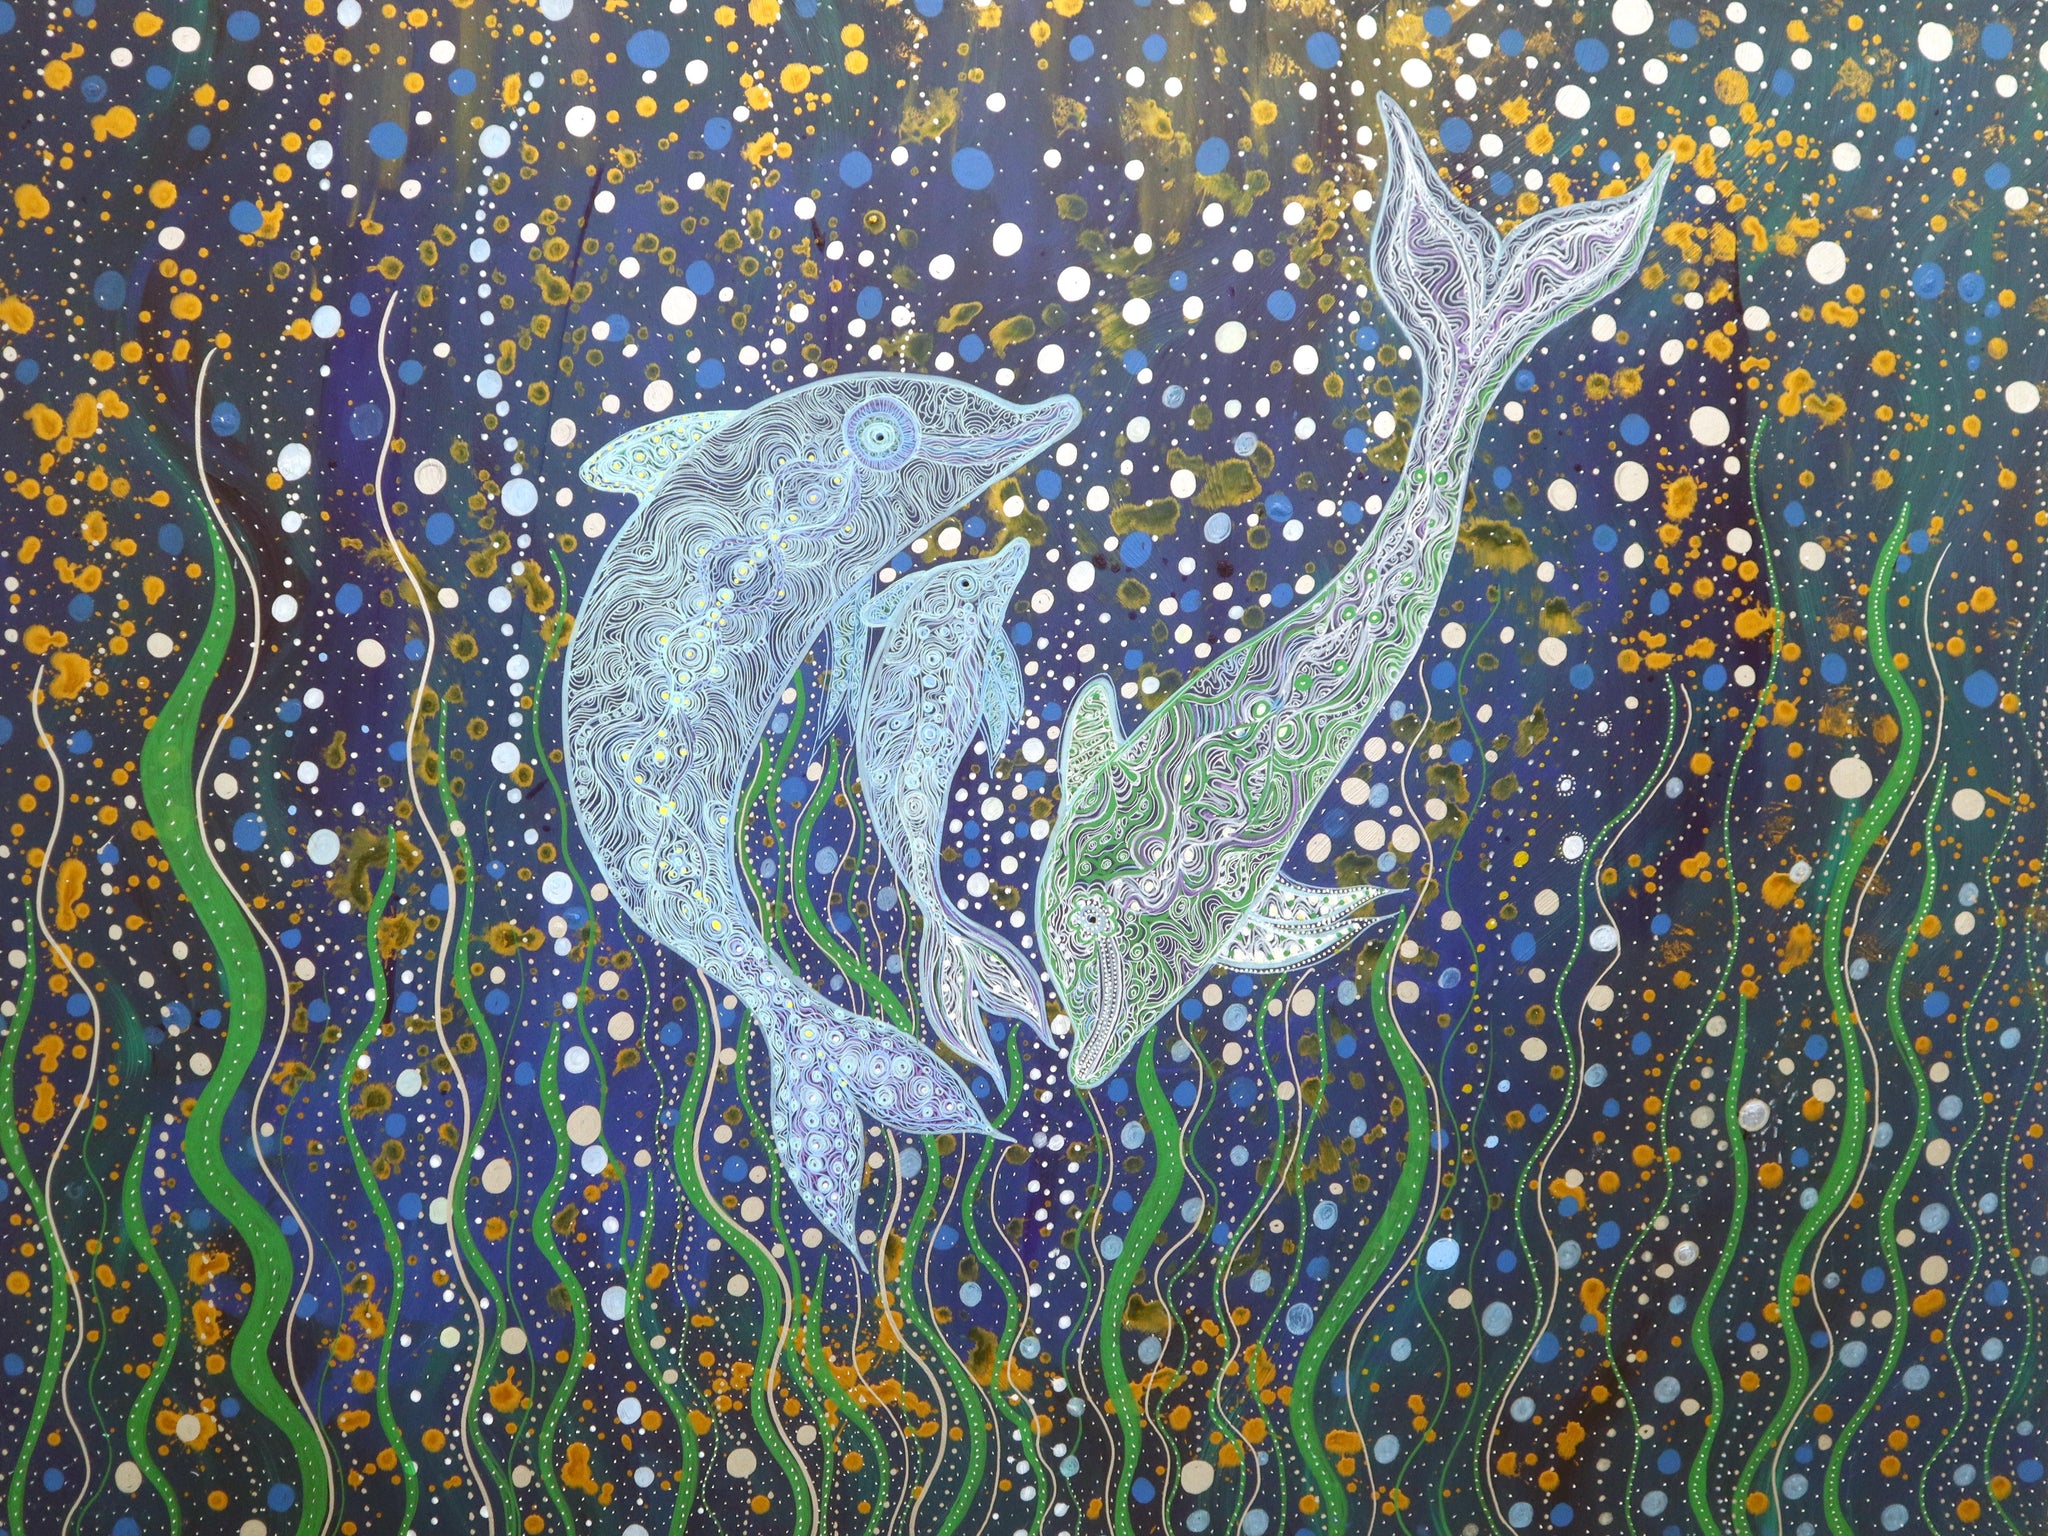 "Dolphin Dreaming" by Christine Winmar